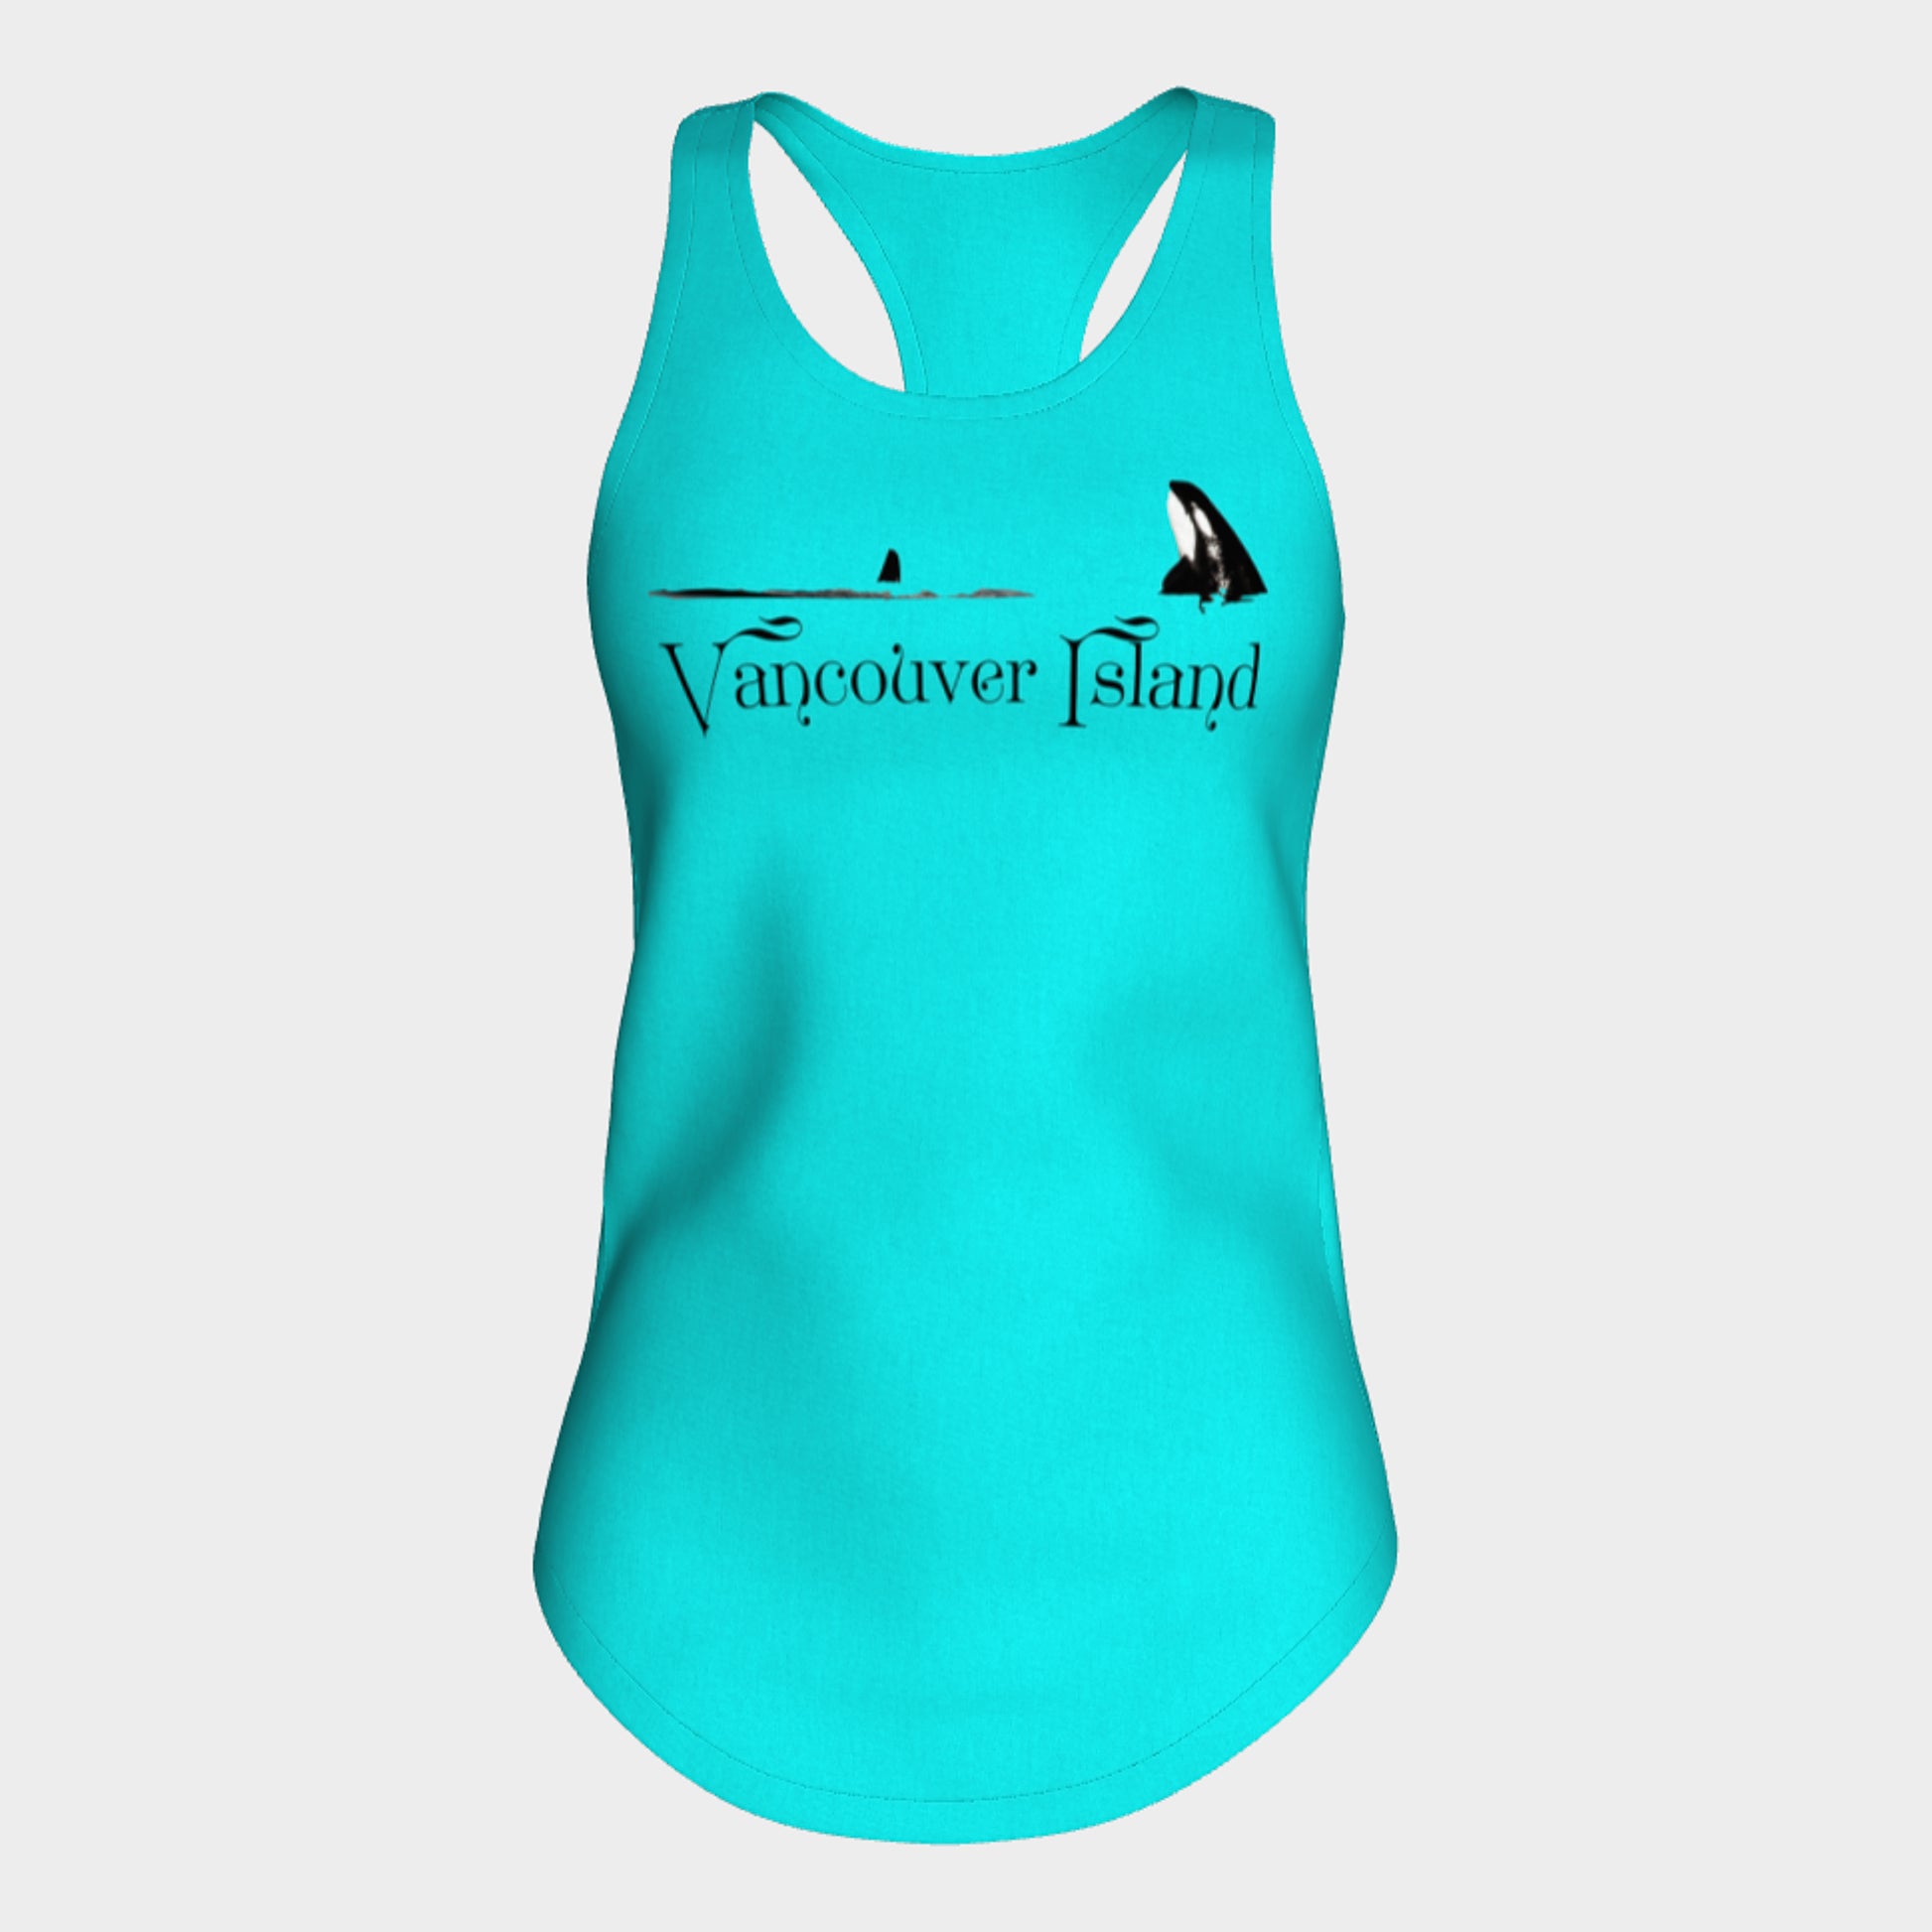 Orca Spy Hop Vancouver Island Racerback Tank Top  Excellent choice for the summer or for working out.   Made from 60% spun cotton and 40% poly for a mix of comfort and performance, you get it all (including my photography and digital art) with this custom printed racerback tank top.   Van Isle Goddess Next Level racerback tank top will quickly become you go-to tank top because of the super comfy fit!